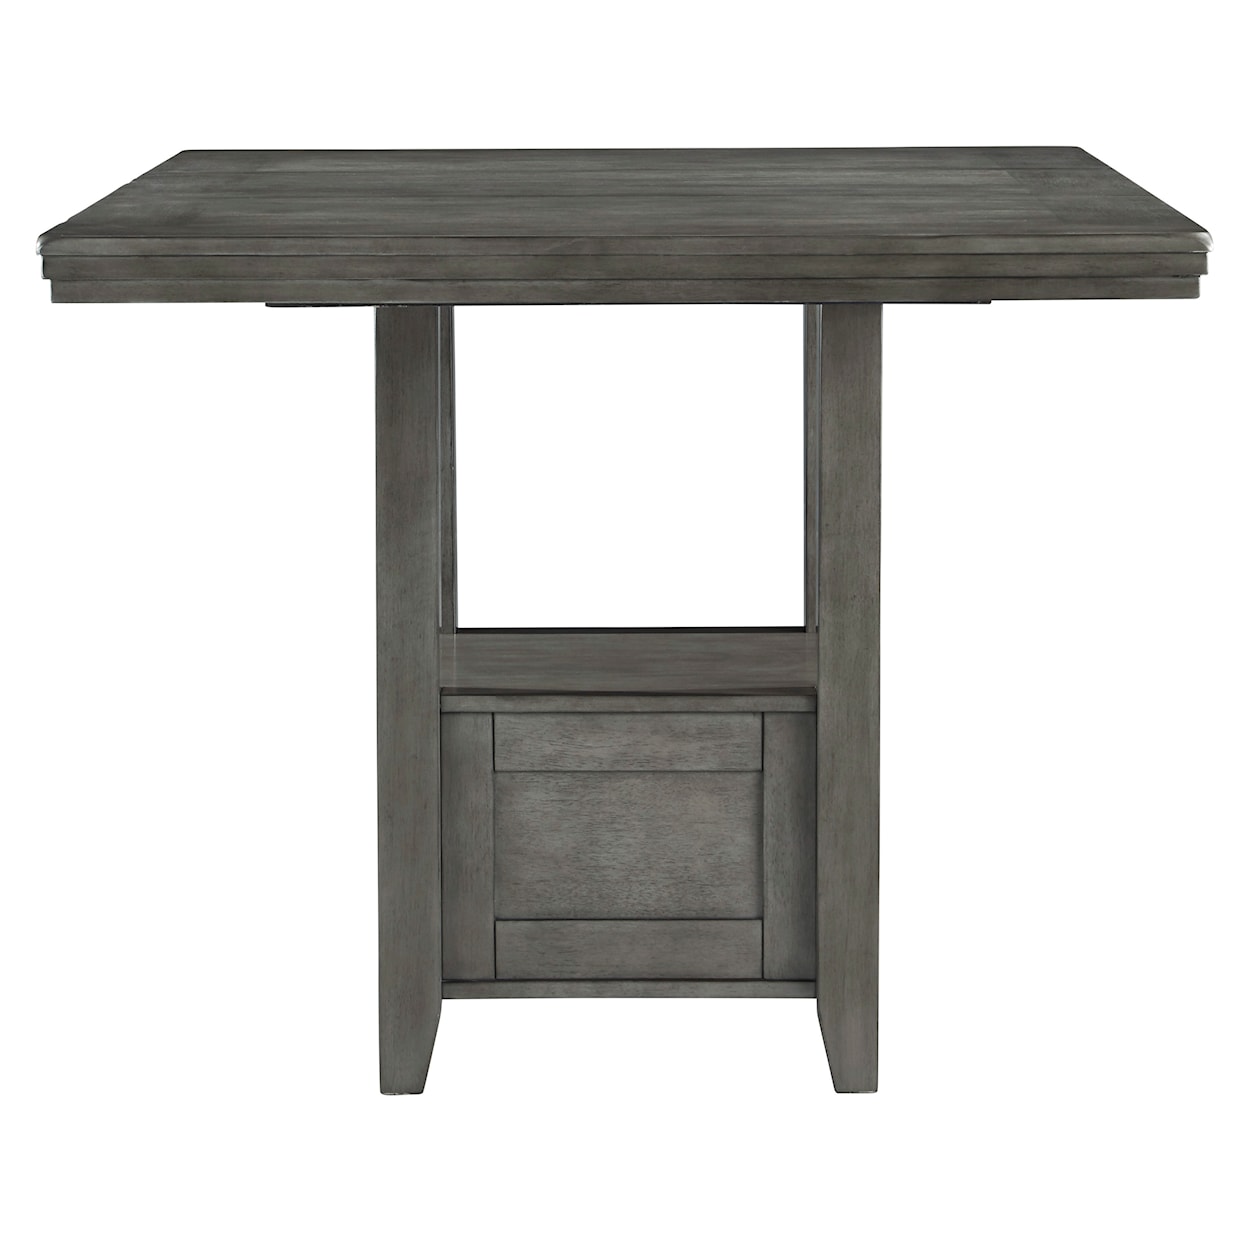 Ashley Furniture Signature Design Hallanden Counter Height Dining Extension Table